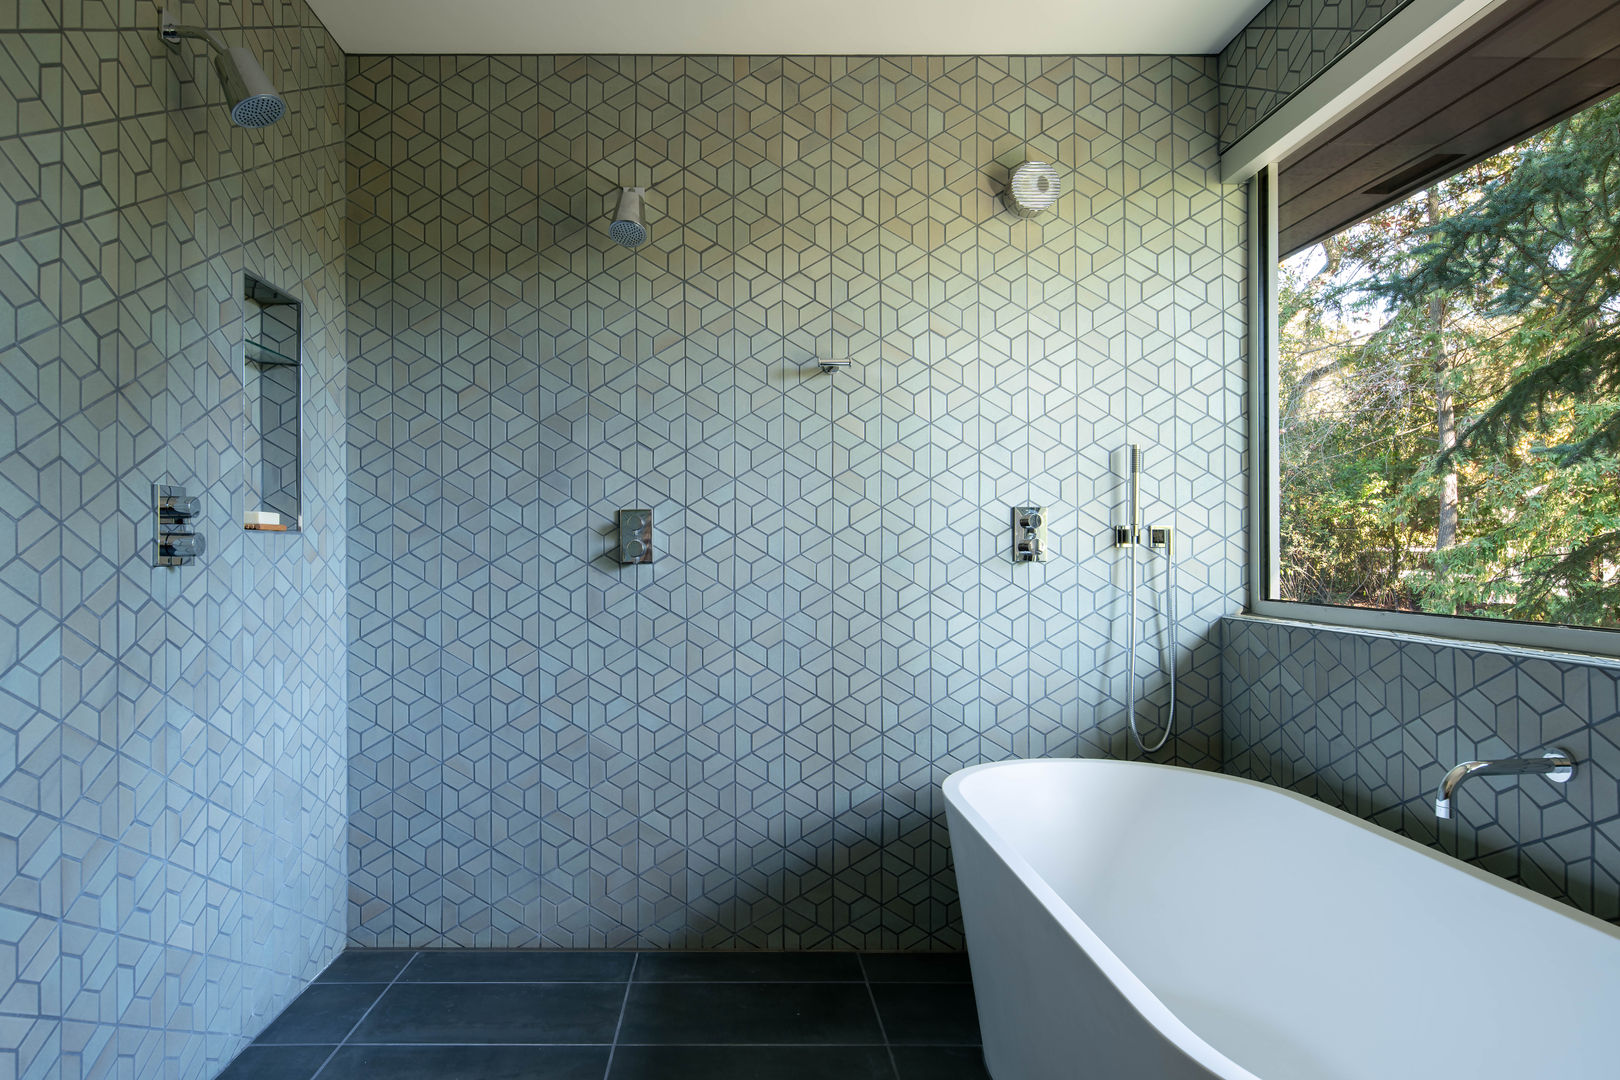 Lafayette Modern Remodel by Klopf Architecture, Klopf Architecture Klopf Architecture Salle de bain moderne